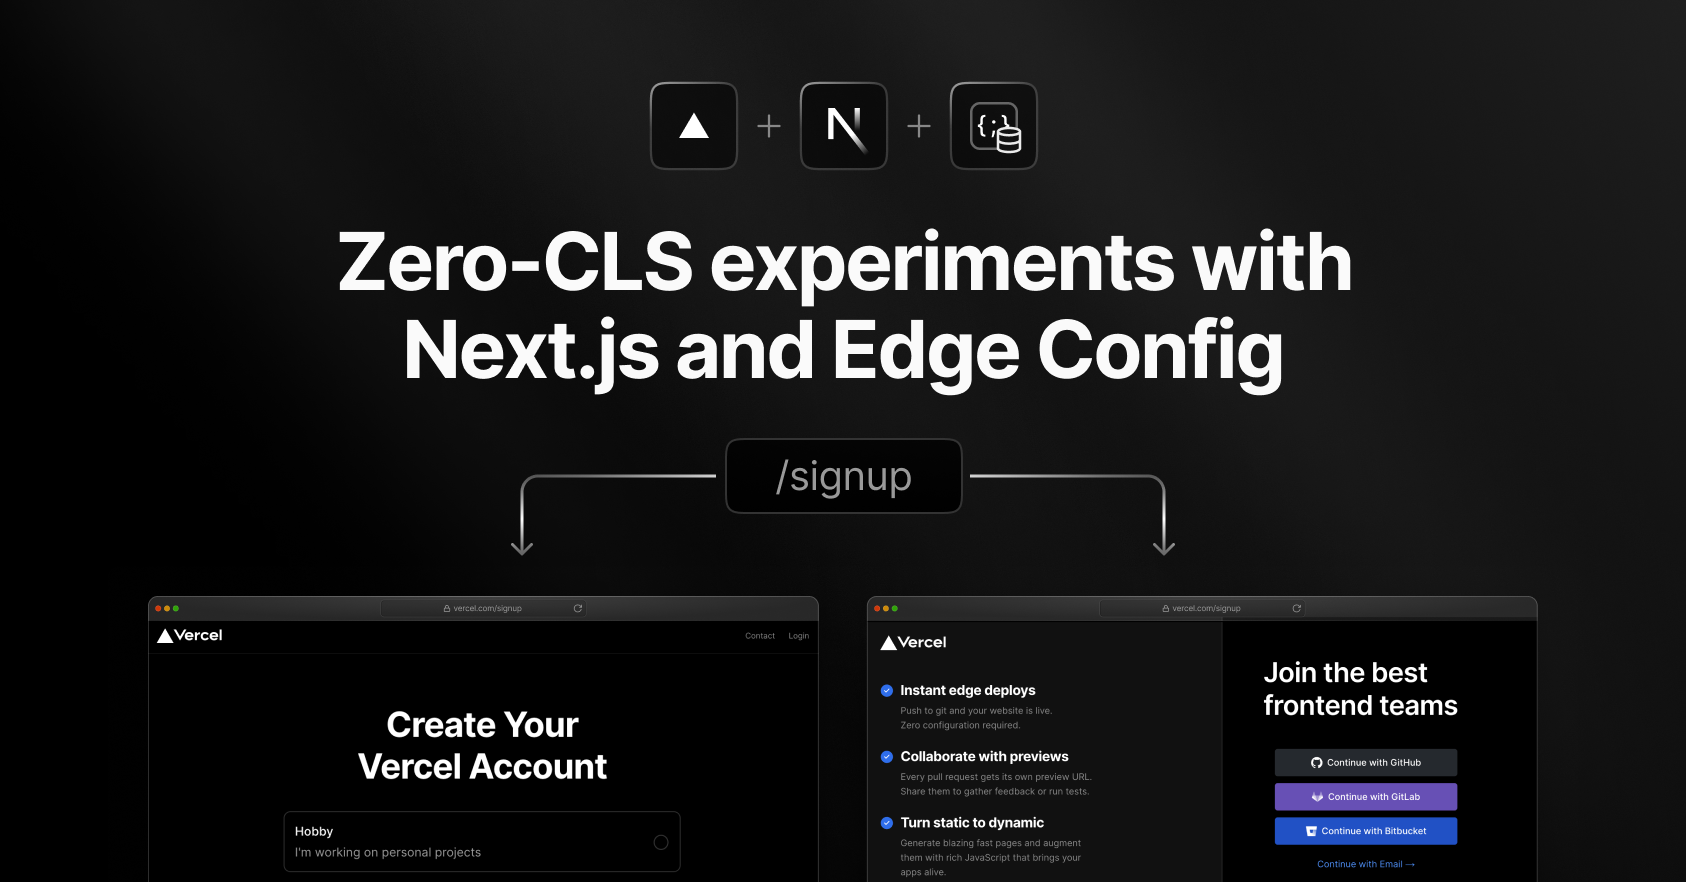 How to build zero-CLS A/B tests with Next.js ...